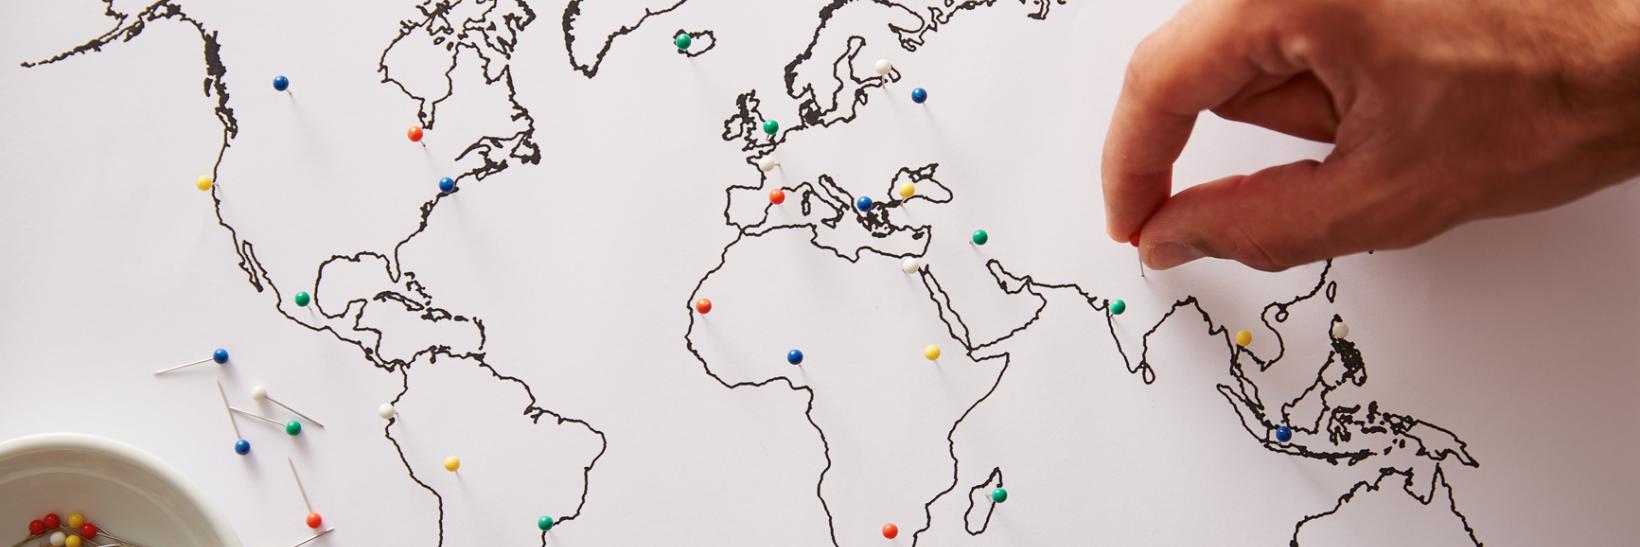 A hand adds push pins to different places on a world map